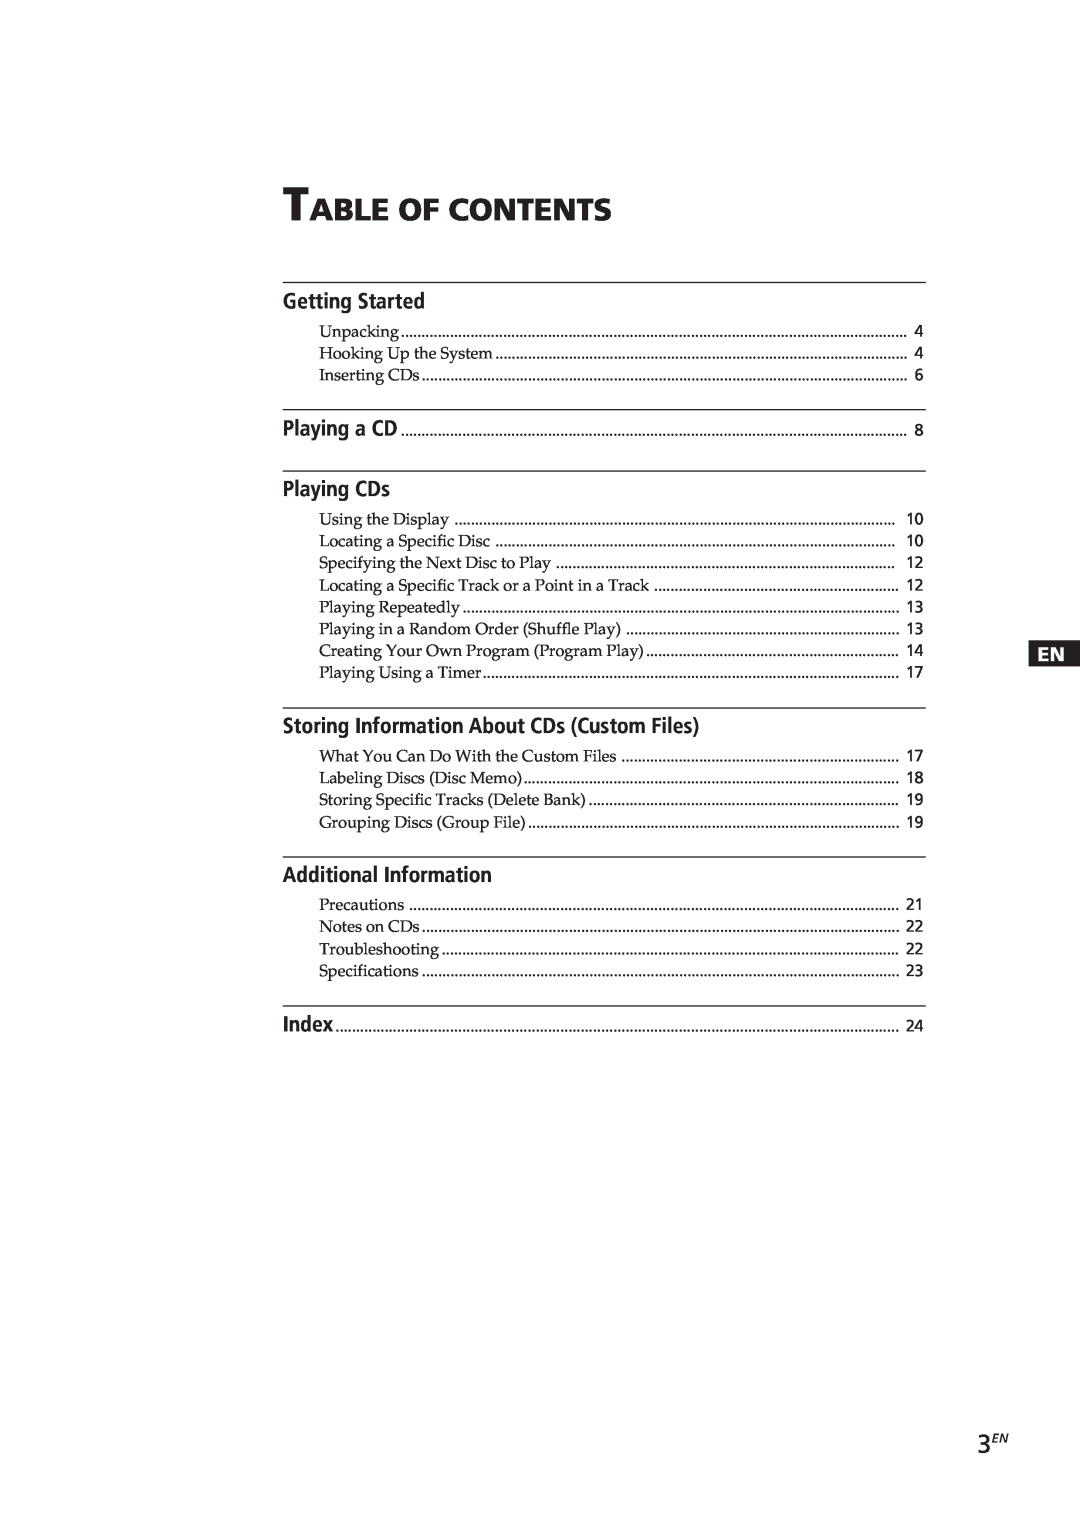 Sony CDP-CX153 manual Table Of Contents, Getting Started, Playing CDs, Storing Information About CDs Custom Files 